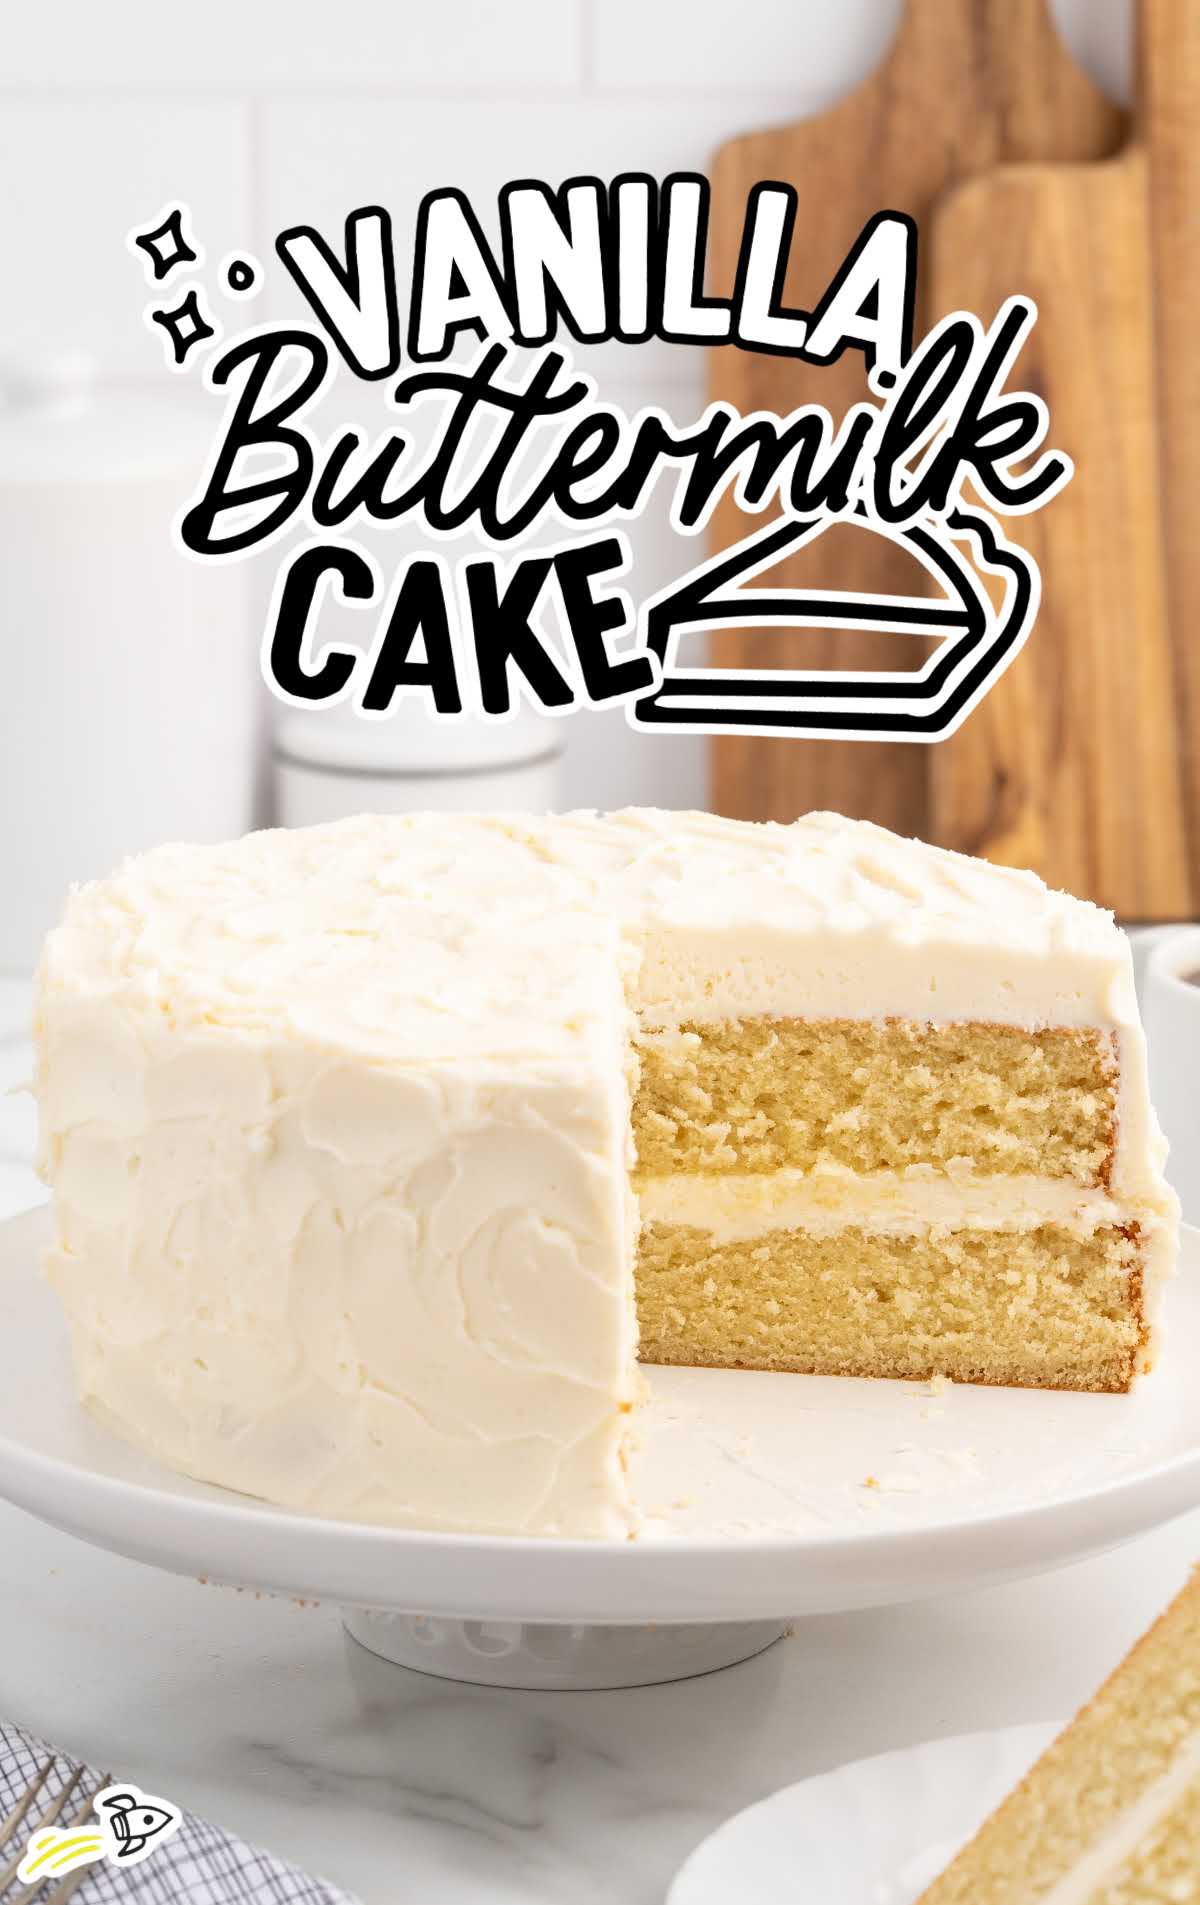 Vanilla Buttermilk Cake with a slice missing on a cake stand